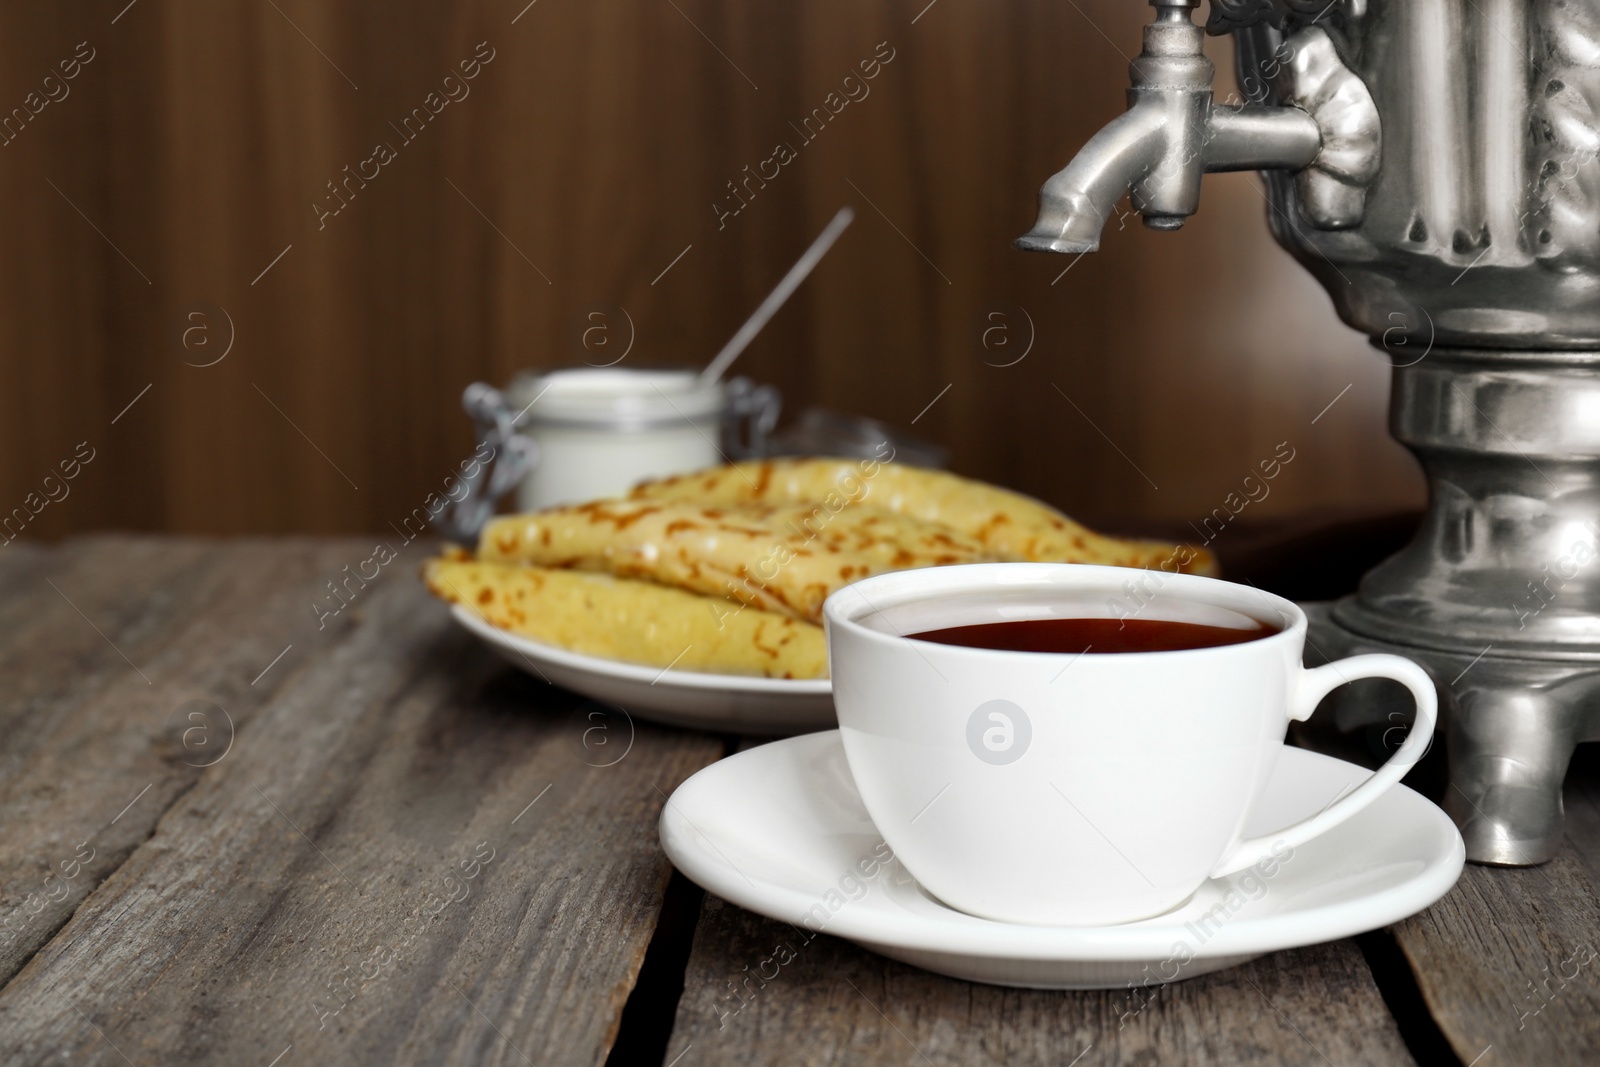 Photo of Vintage samovar, cup of hot drink and pancakes served on wooden table. Traditional Russian tea ceremony